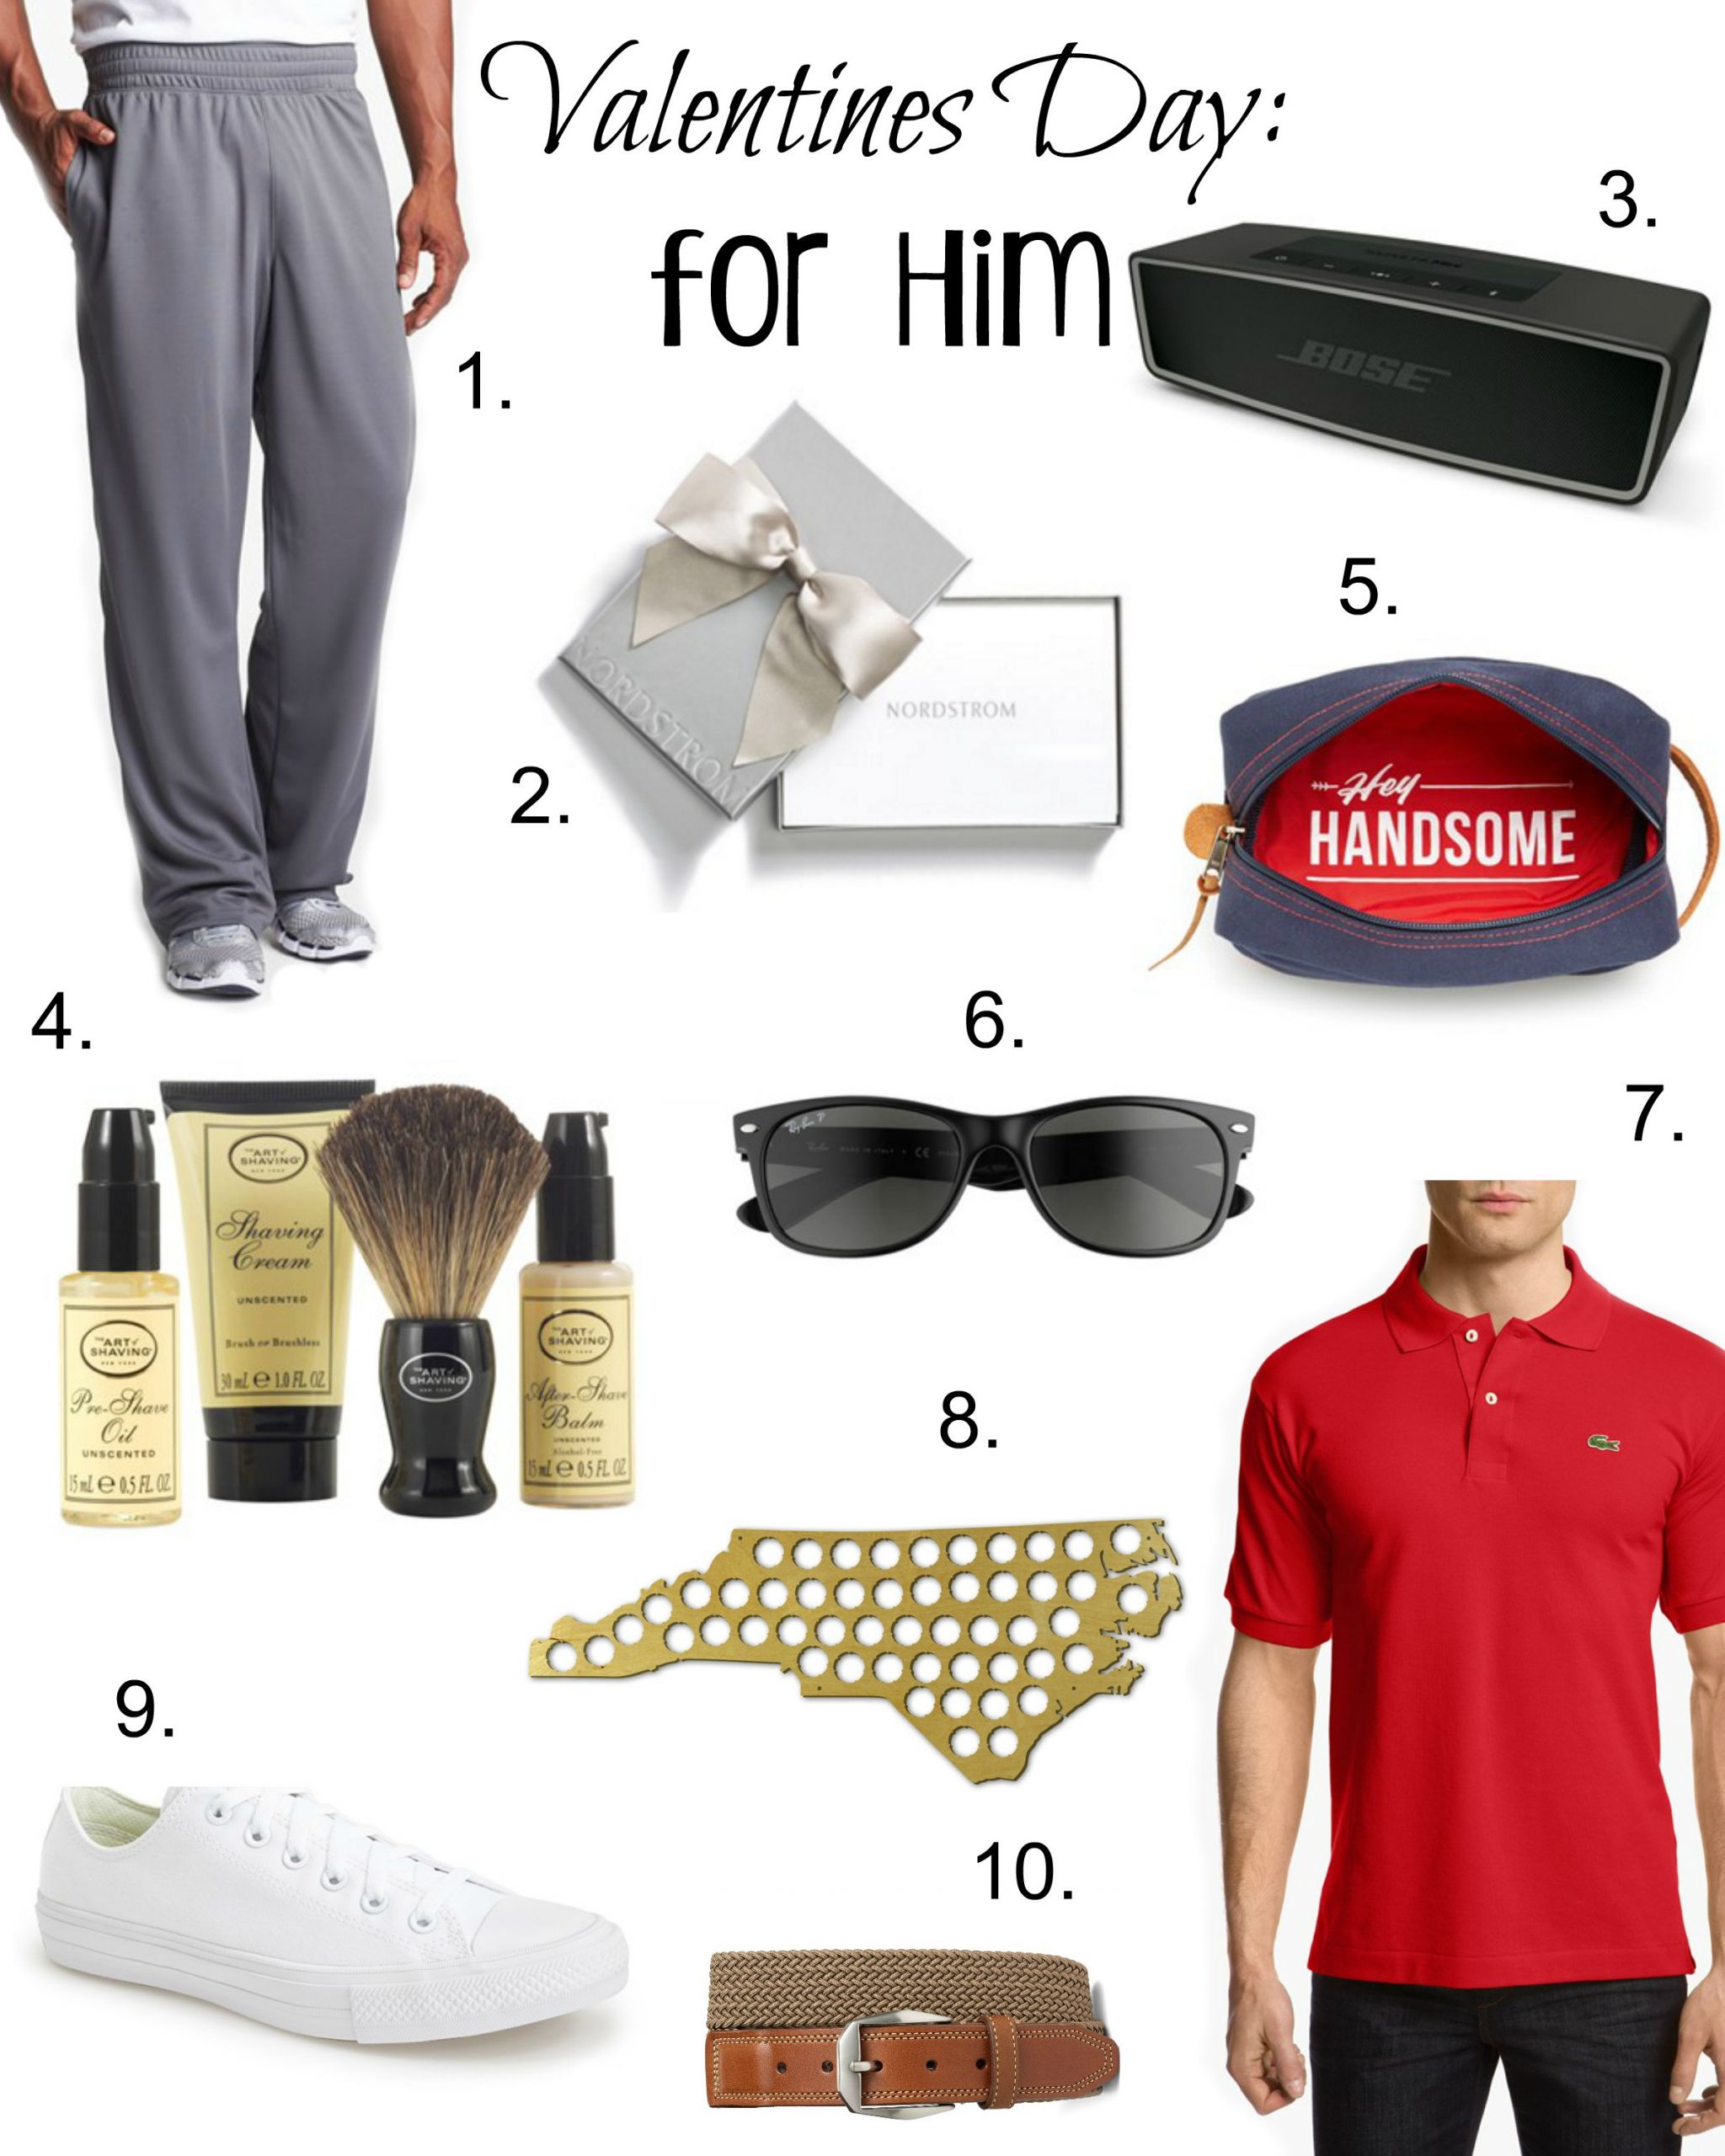 Good Valentines Day Gifts For Him
 Top 10 Valentines Day Gifts For Him